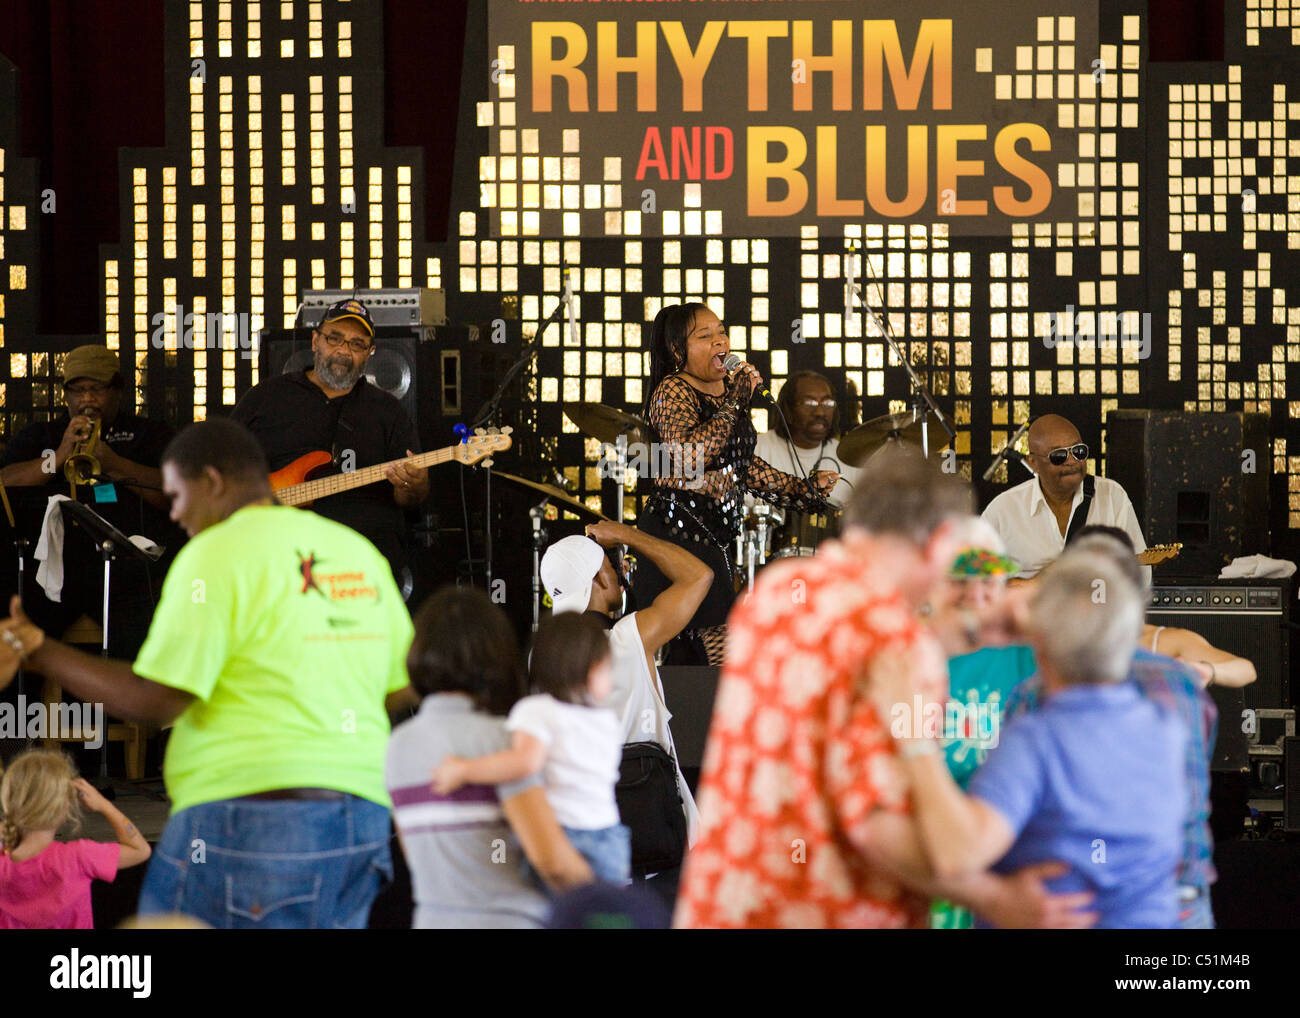 Concert goers dance in front of a Rhythm and Blues concert Stock Photo